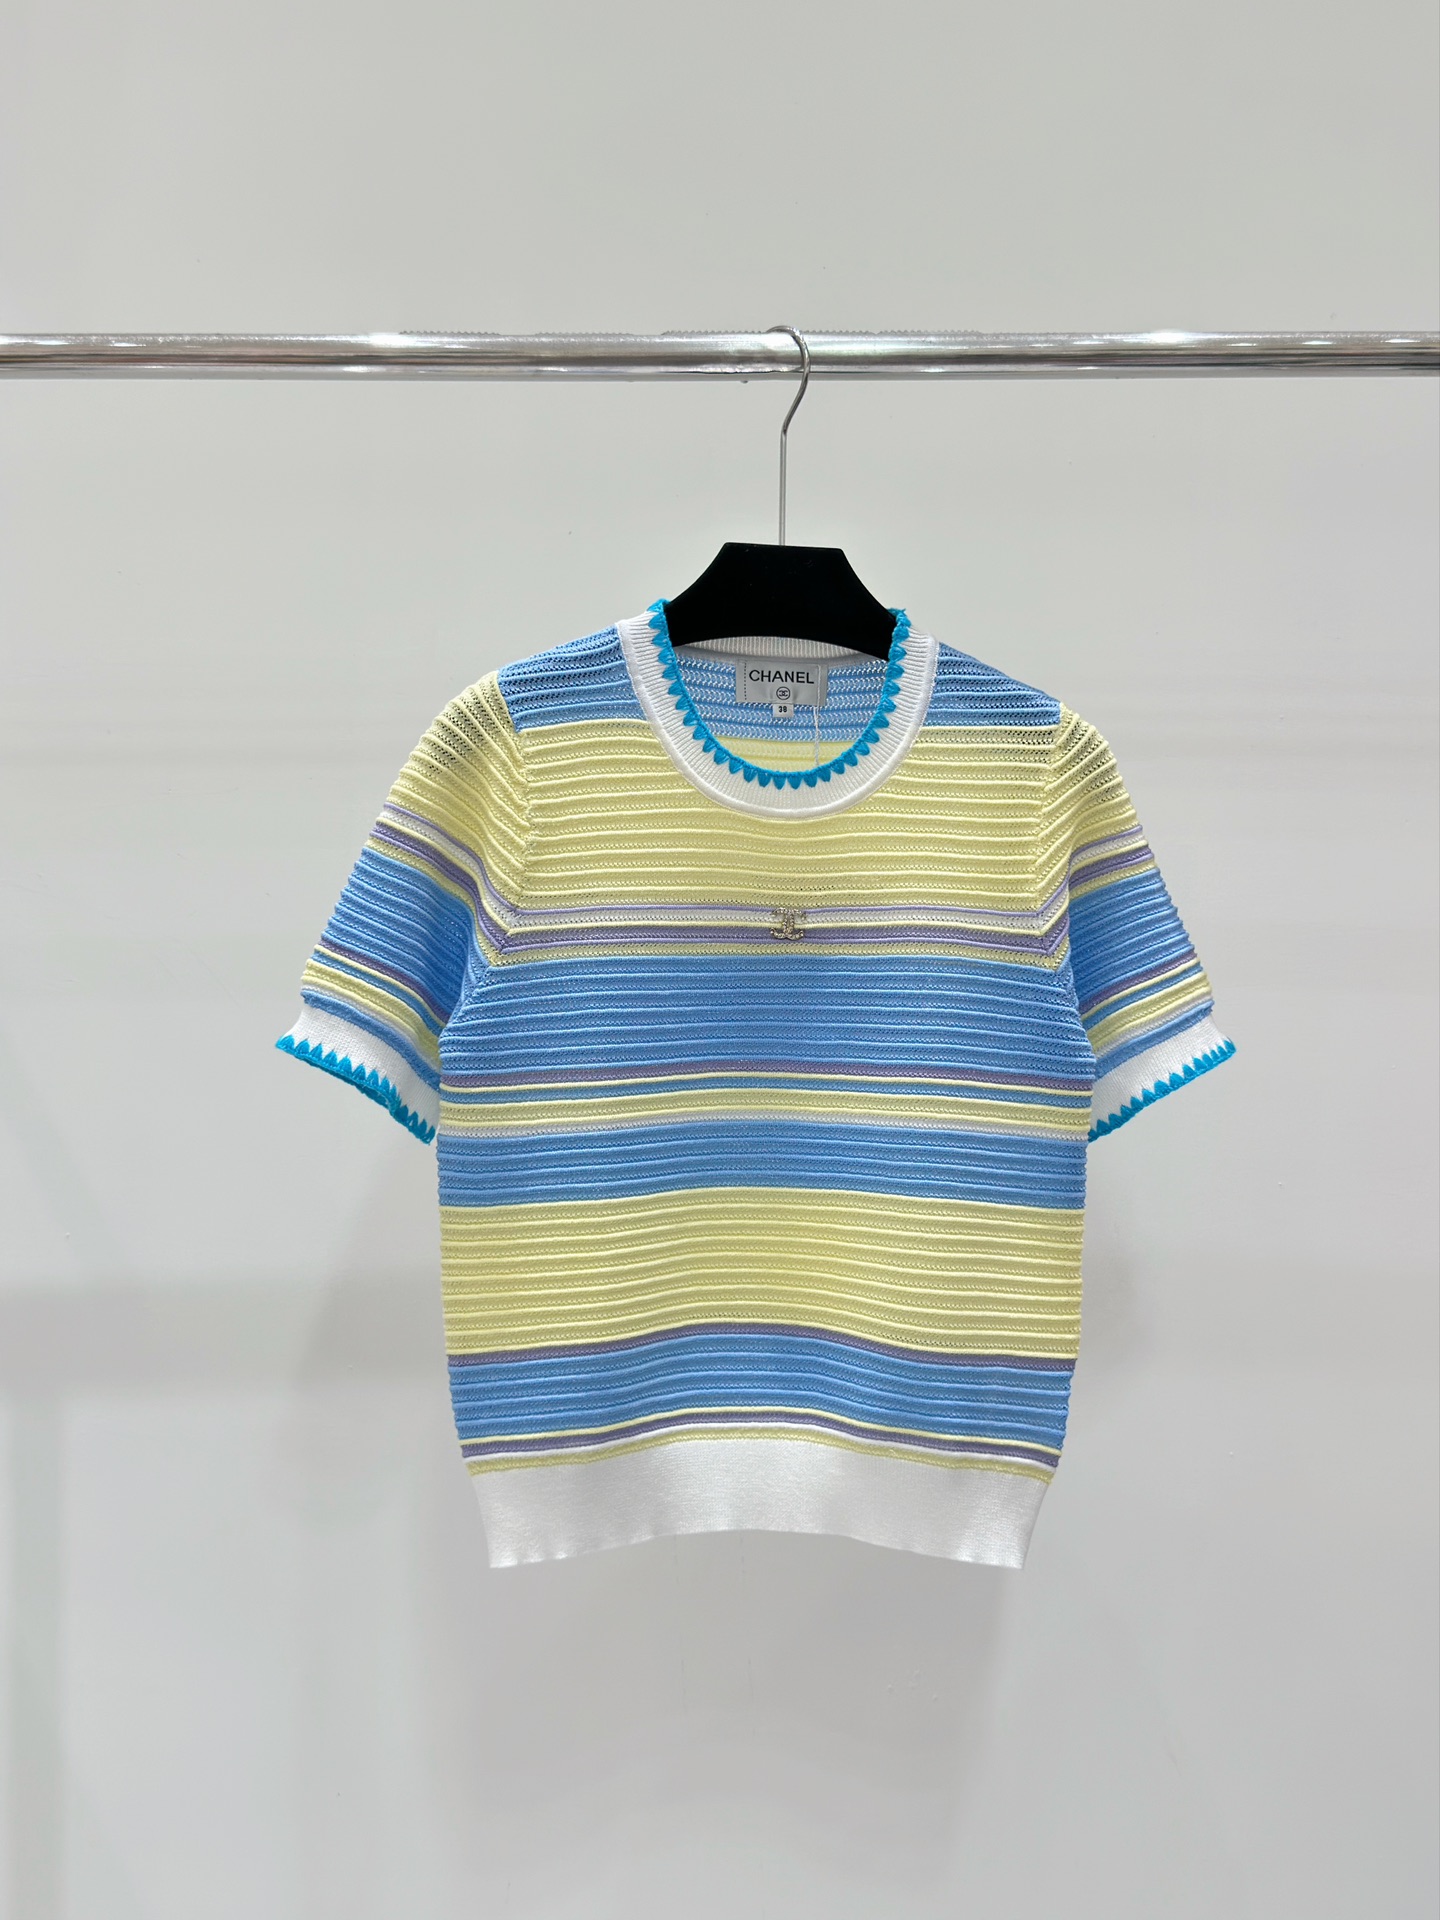 Chanel Clothing T-Shirt Knitting Spring/Summer Collection Short Sleeve